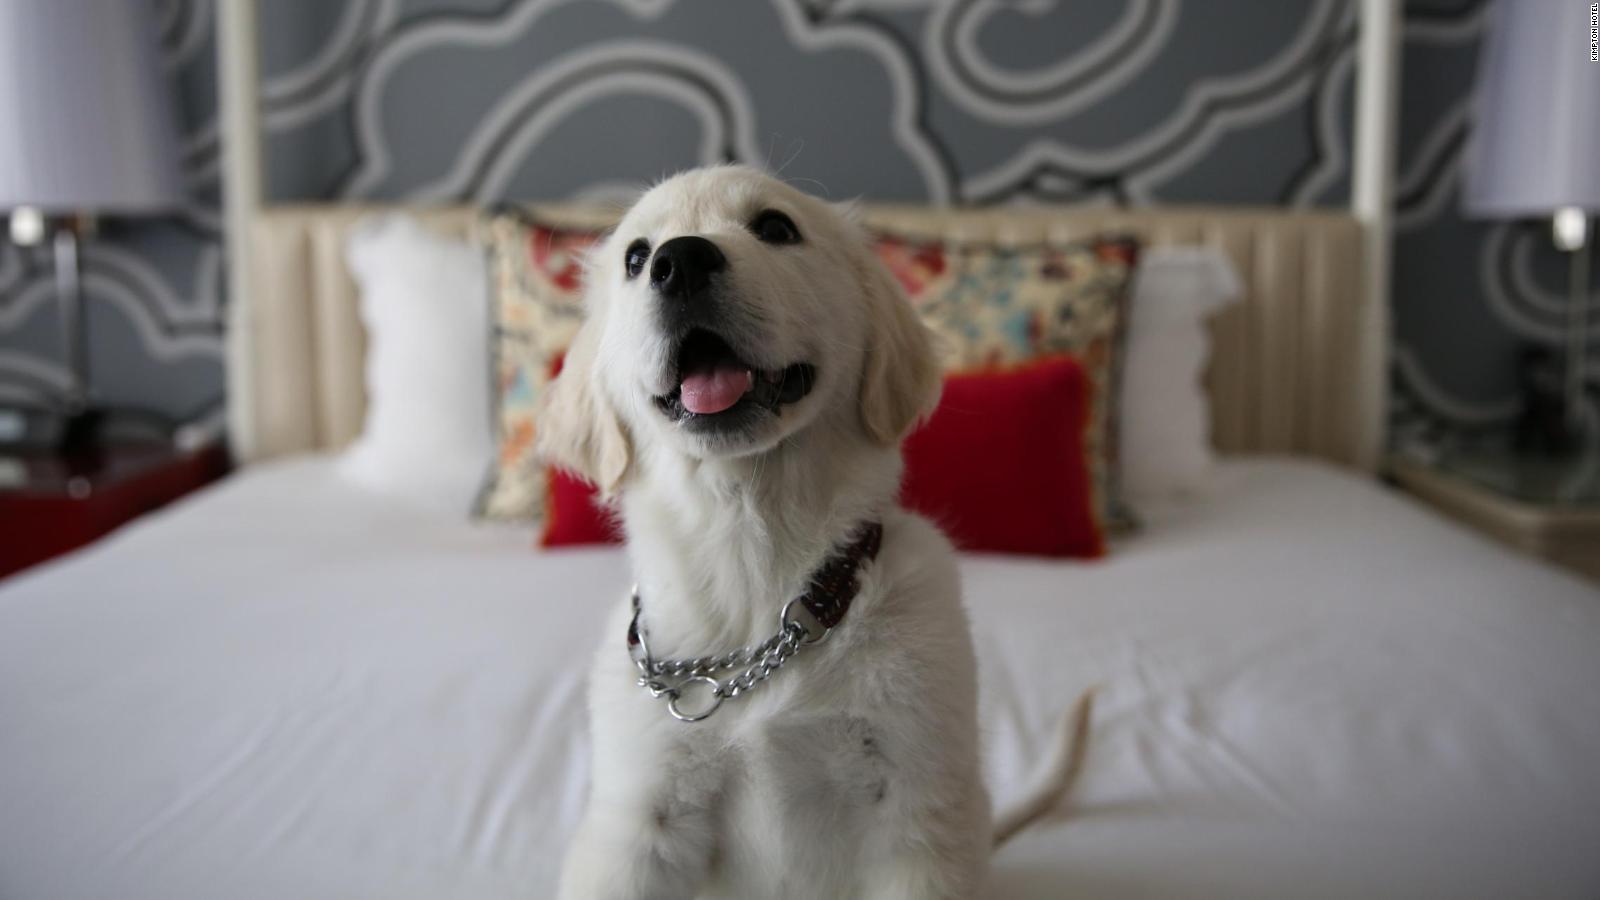 Pet-friendly hotels: 13 of the best around the world | CNN Travel